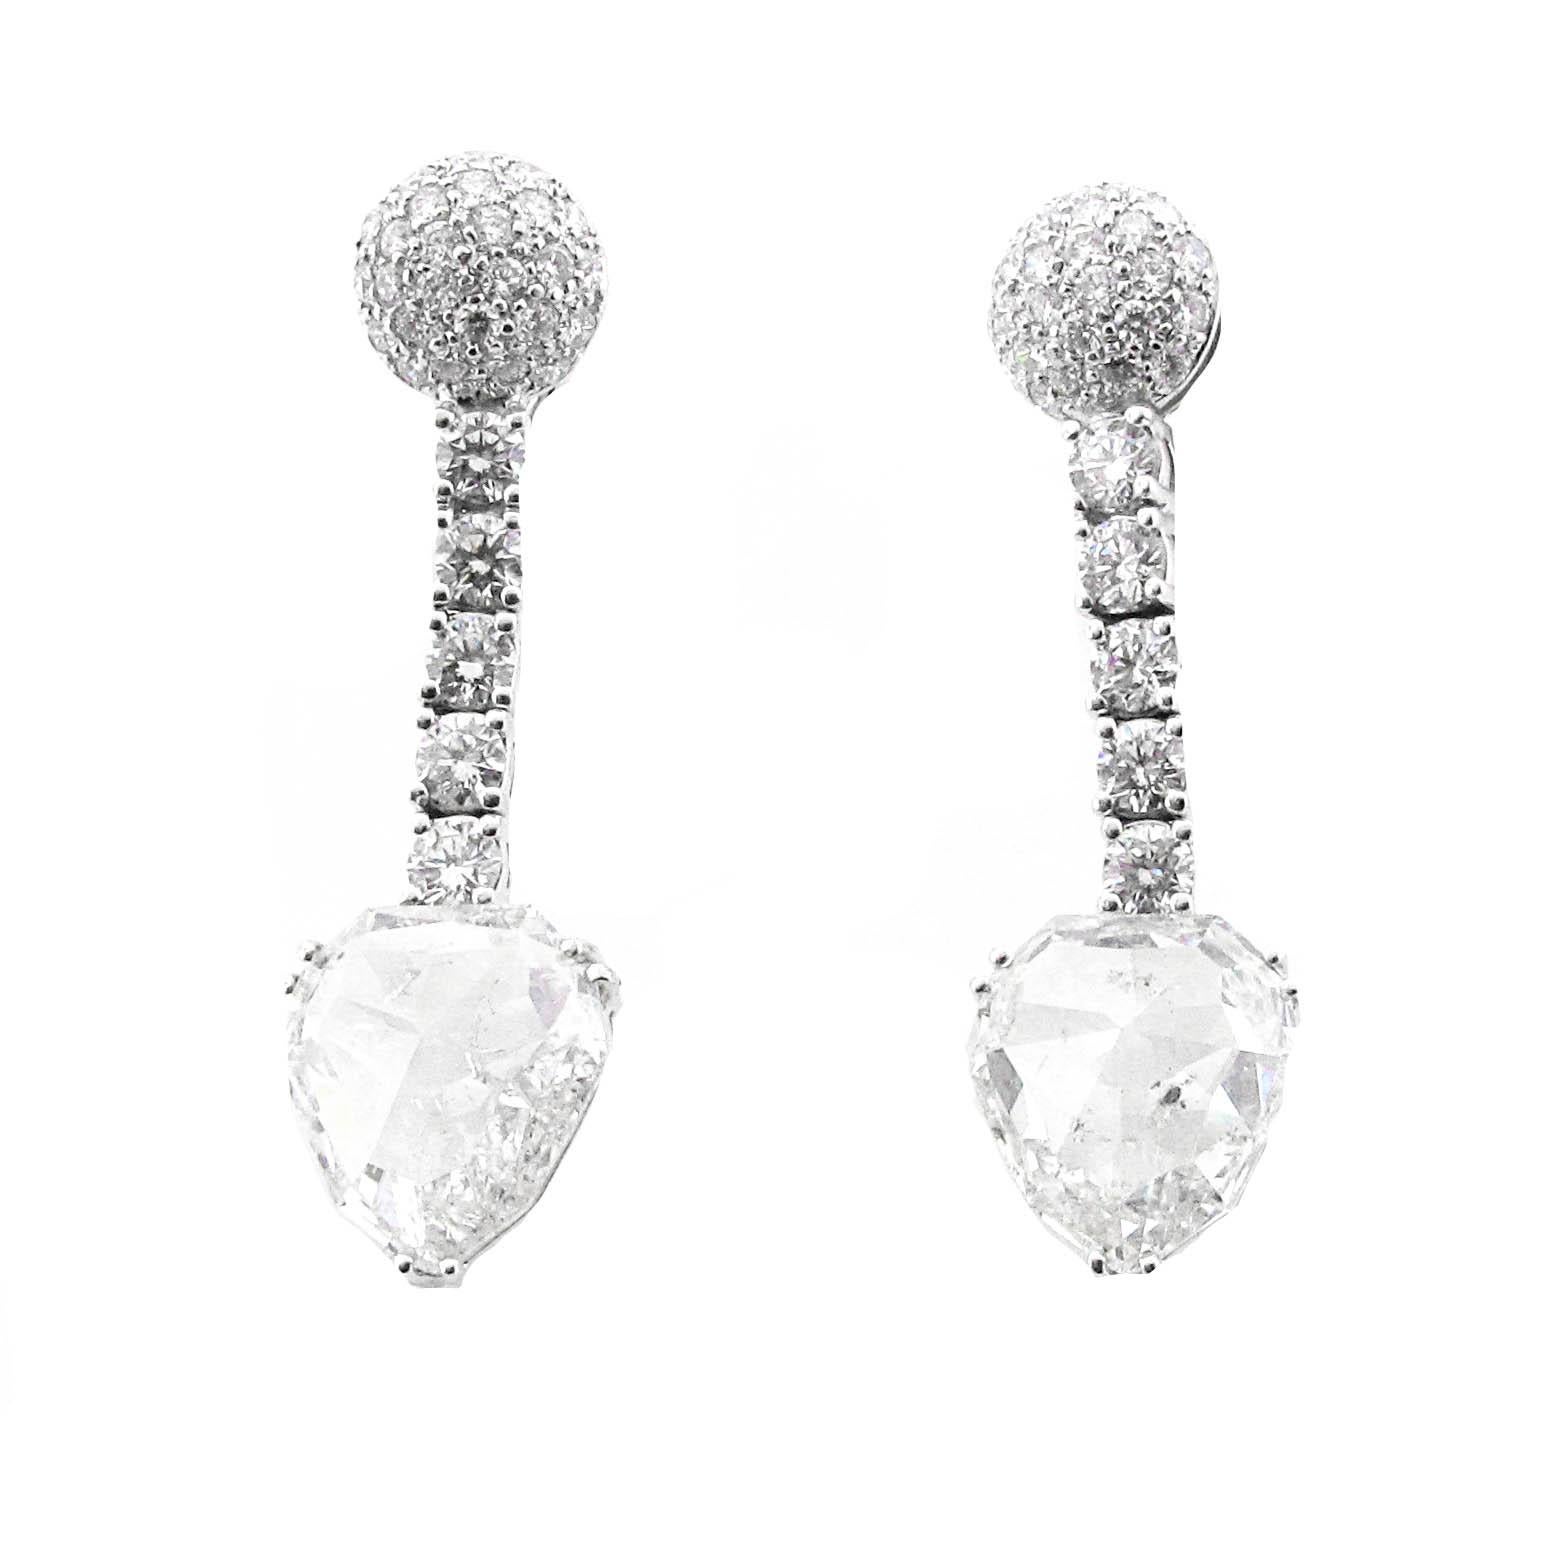 18 karat white gold rose cut diamond dangle earrings. These earrings have a total diamond weight of 11.65 carats. The tops of both earrings are made with round brilliant diamonds. One of the earrings, not including the bottom stone, weighs 1.21